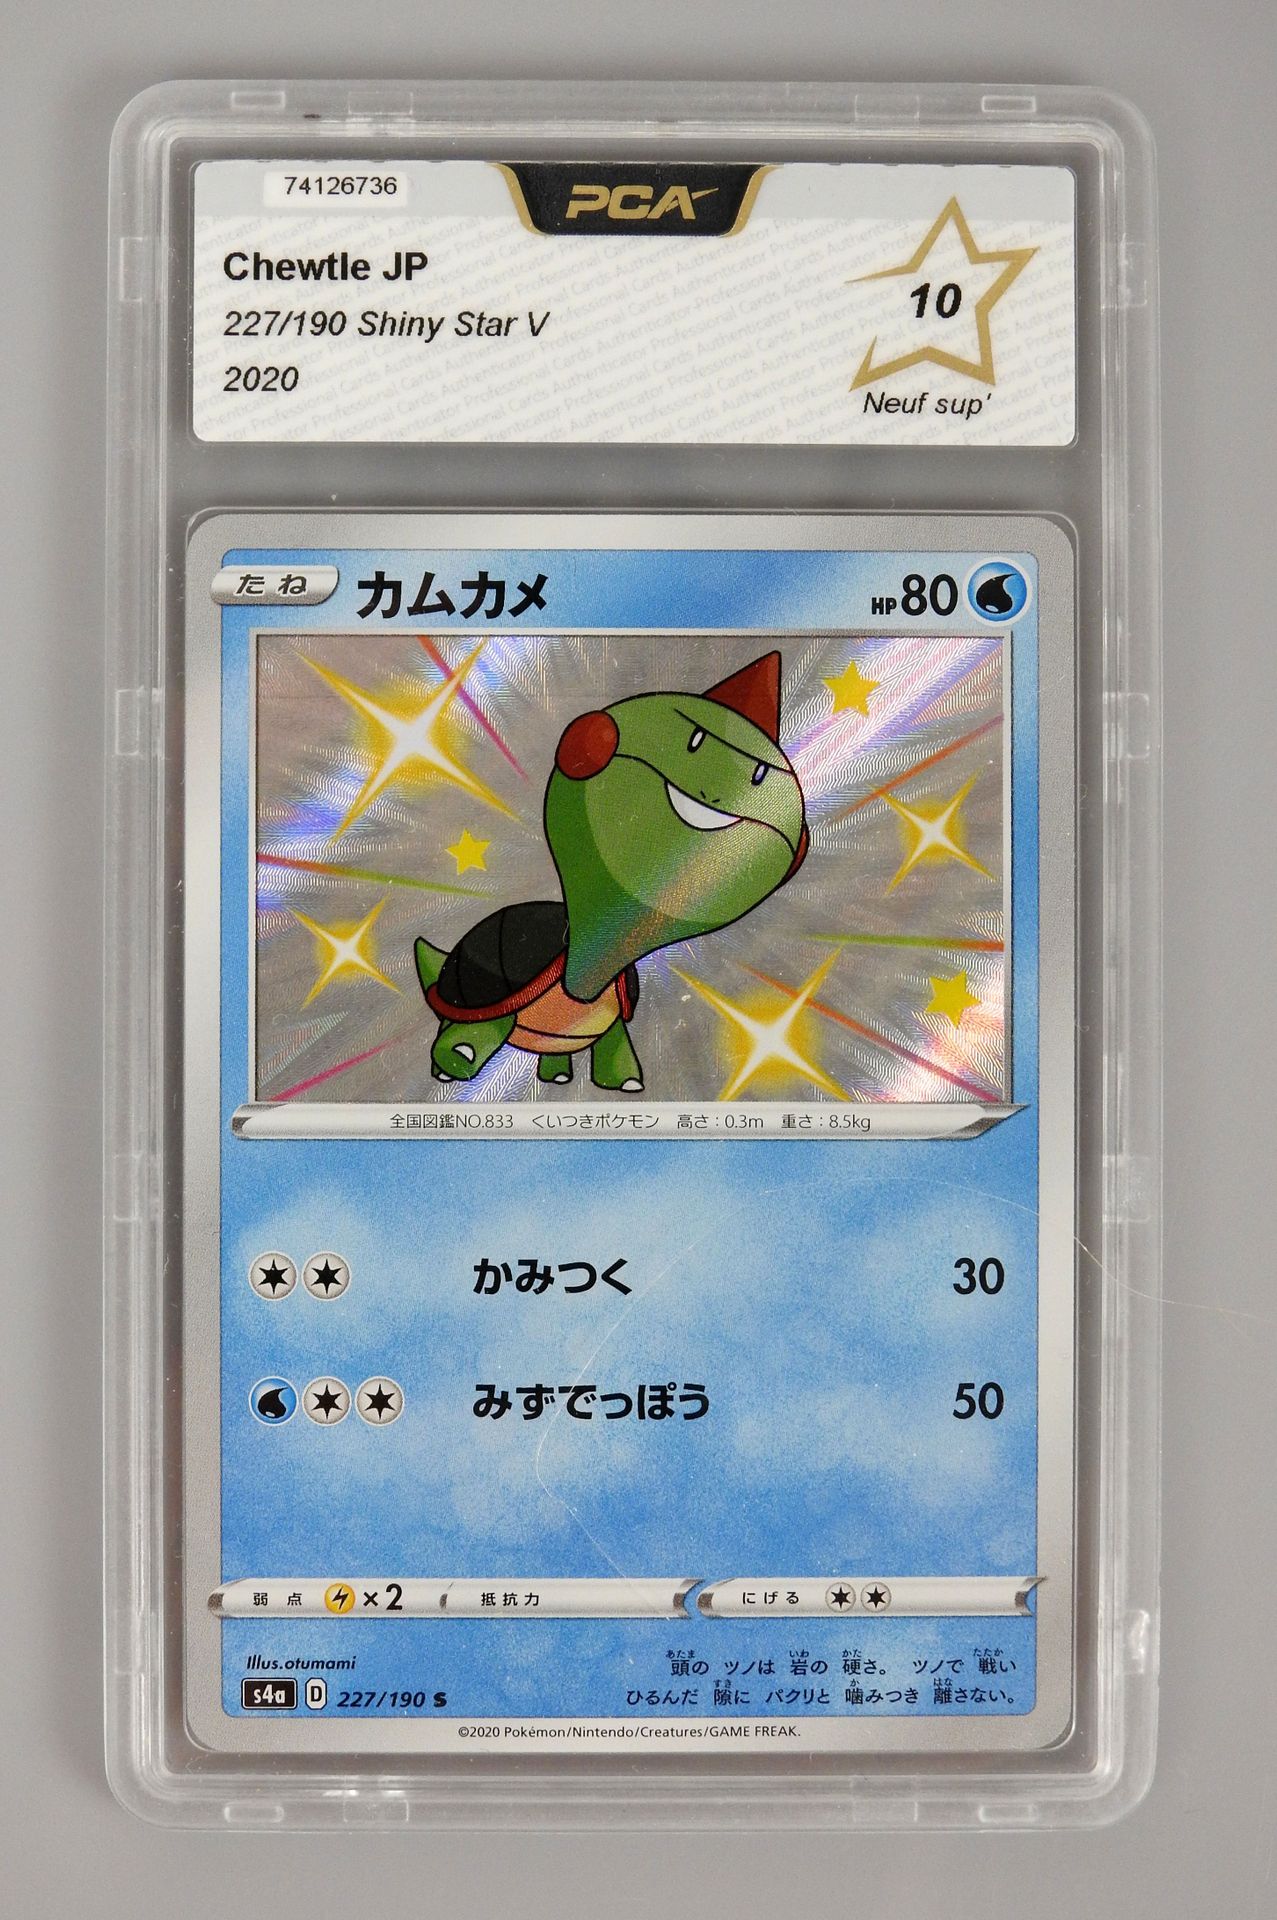 Null CHEWTLE

Shiny Star V 227/190 JAP

Pokemon card rated PCA 10/10